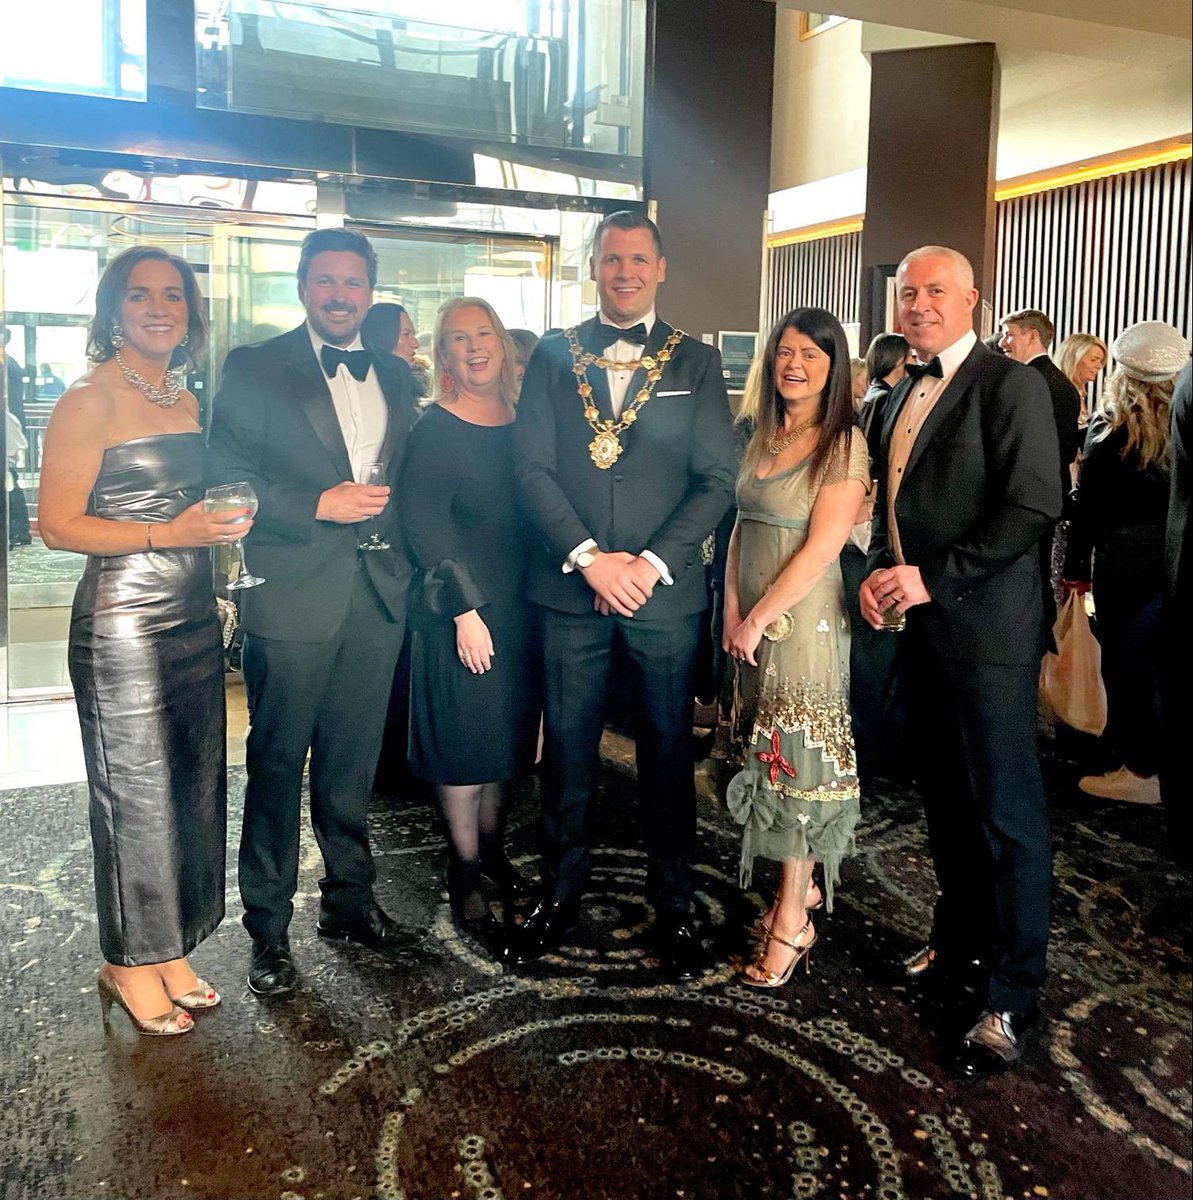 Lovely night at the Mayoral Ball in Galway in support of five fantastic charities. Thanks to those who joined our @WesternDevCo table & to our hosts @EddieHoareFG & @PammieRich Great to meet The Taoiseach @SimonHarrisTD again and discuss opportunities for the West & NW.